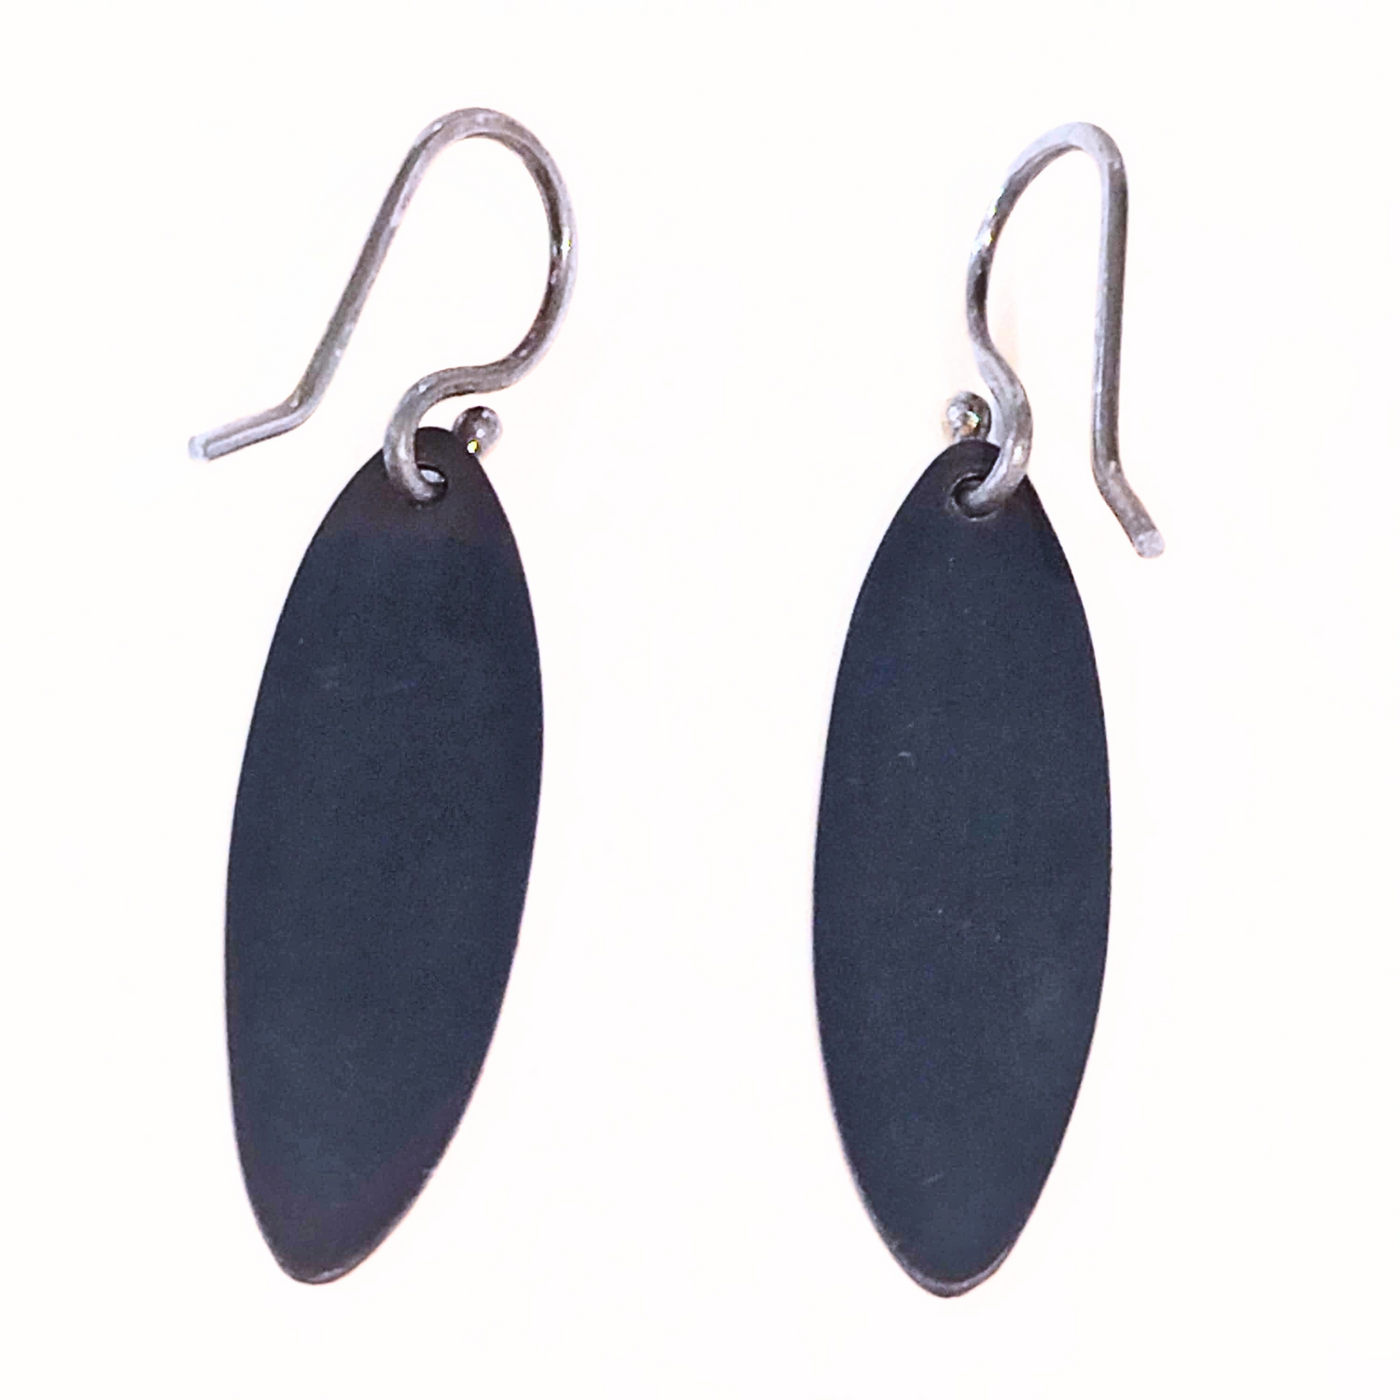 SLG-023 Oval Keum Boo earrings #3 with Sterling Earwires